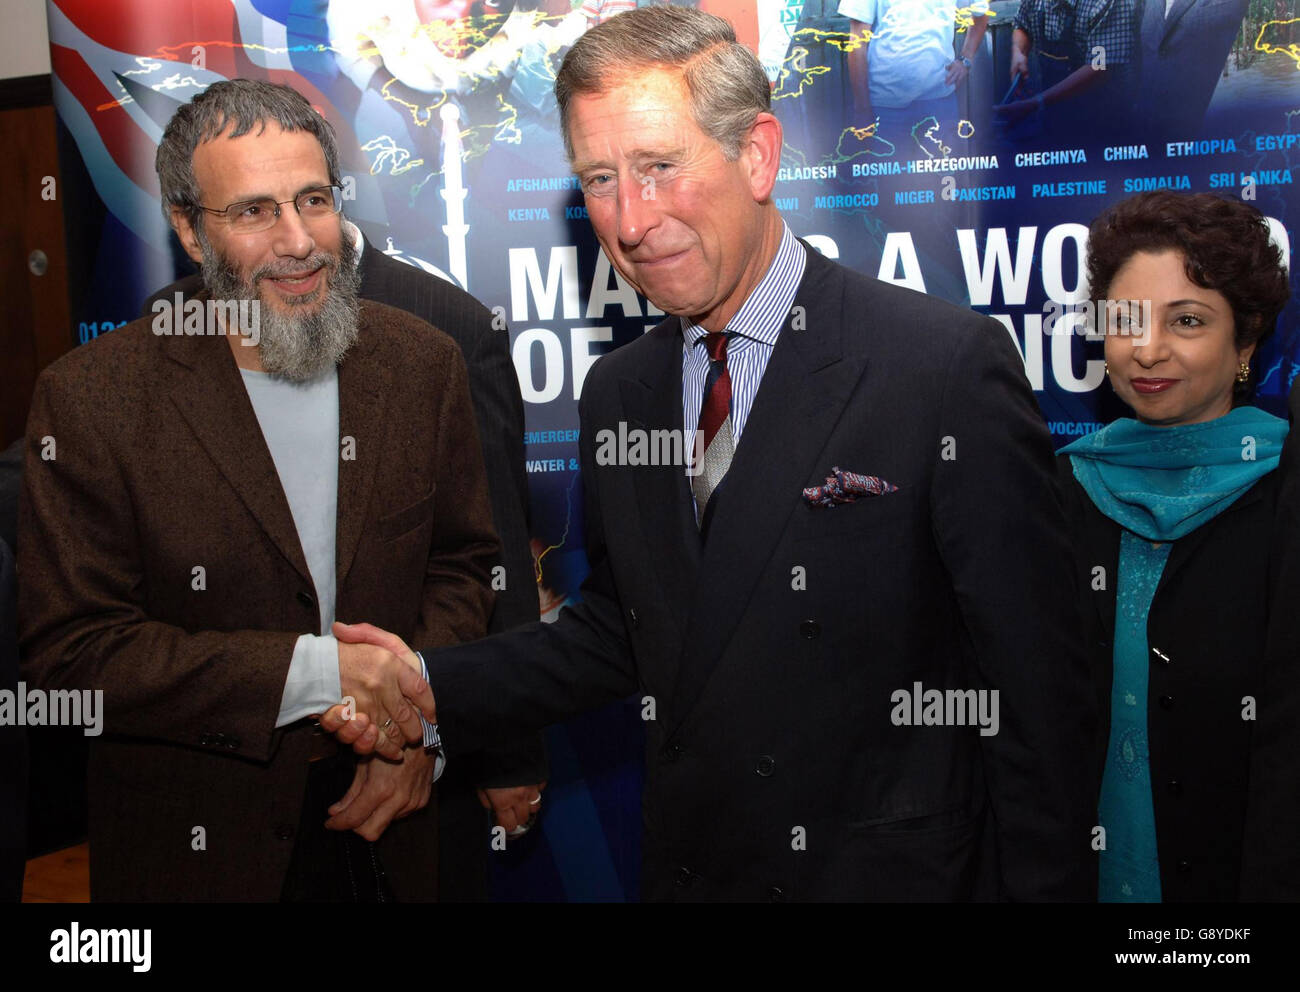 The Prince of Wales shakes hands with Yusuf Islam during a visit to the Muslim Cultural Heritage Centre near Notting Hill in west London, Wednesday October 12, 2005. Charles was given an update on the situation in the earthquake-stricken region of Kashmir by representatives from Islamic Relief and met families who lost loved ones in the disaster. See PA story DEATH Quake Charles. PRESS ASSOCIATION photo. Photo credit should read: Arthur Edwards/PA/WPA Rota The Sun. Stock Photo